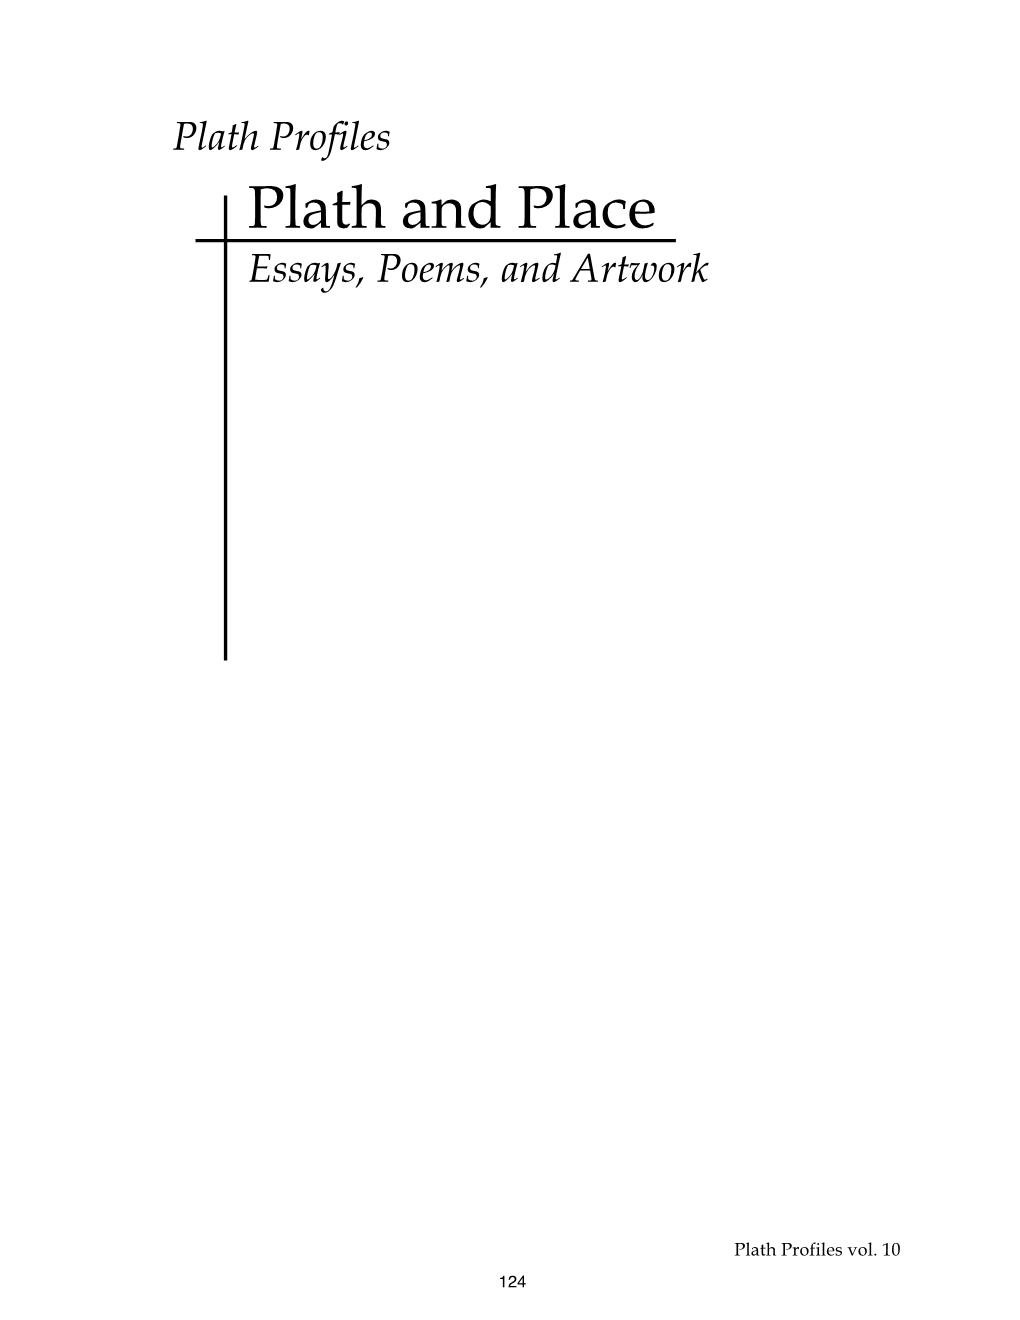 Plath and Place